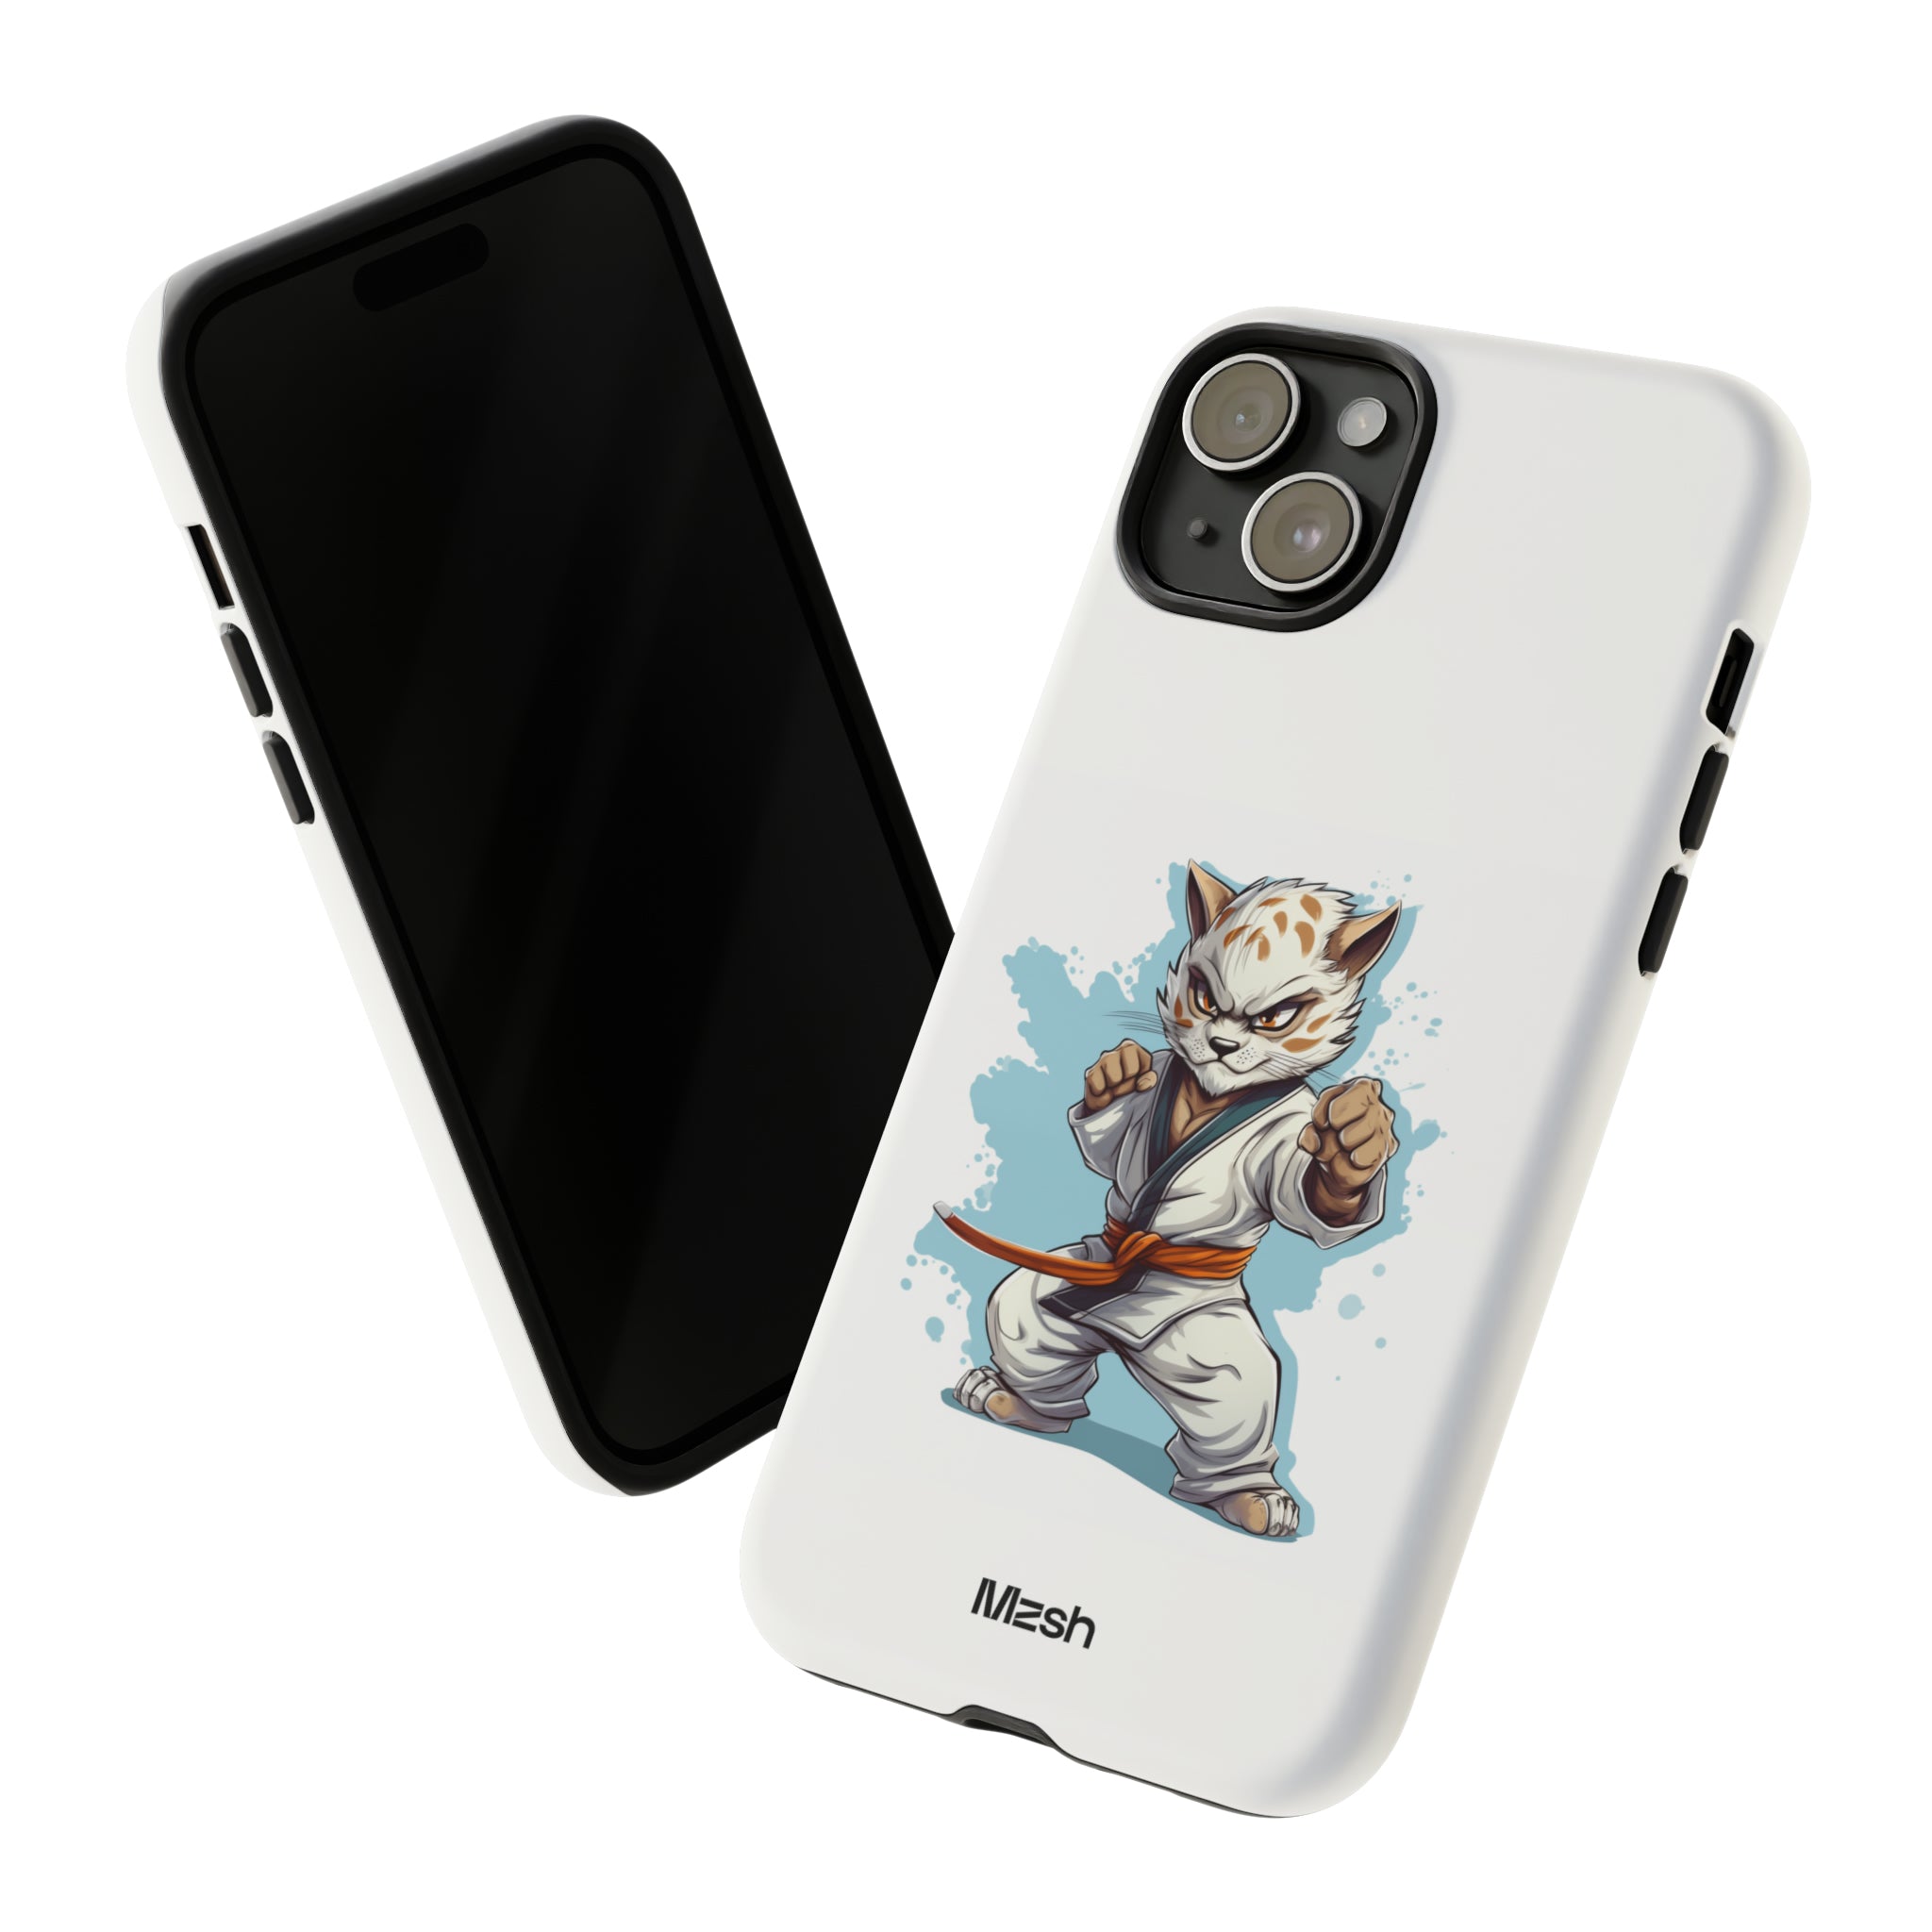 Kung Fu Tiger - iPhone Case